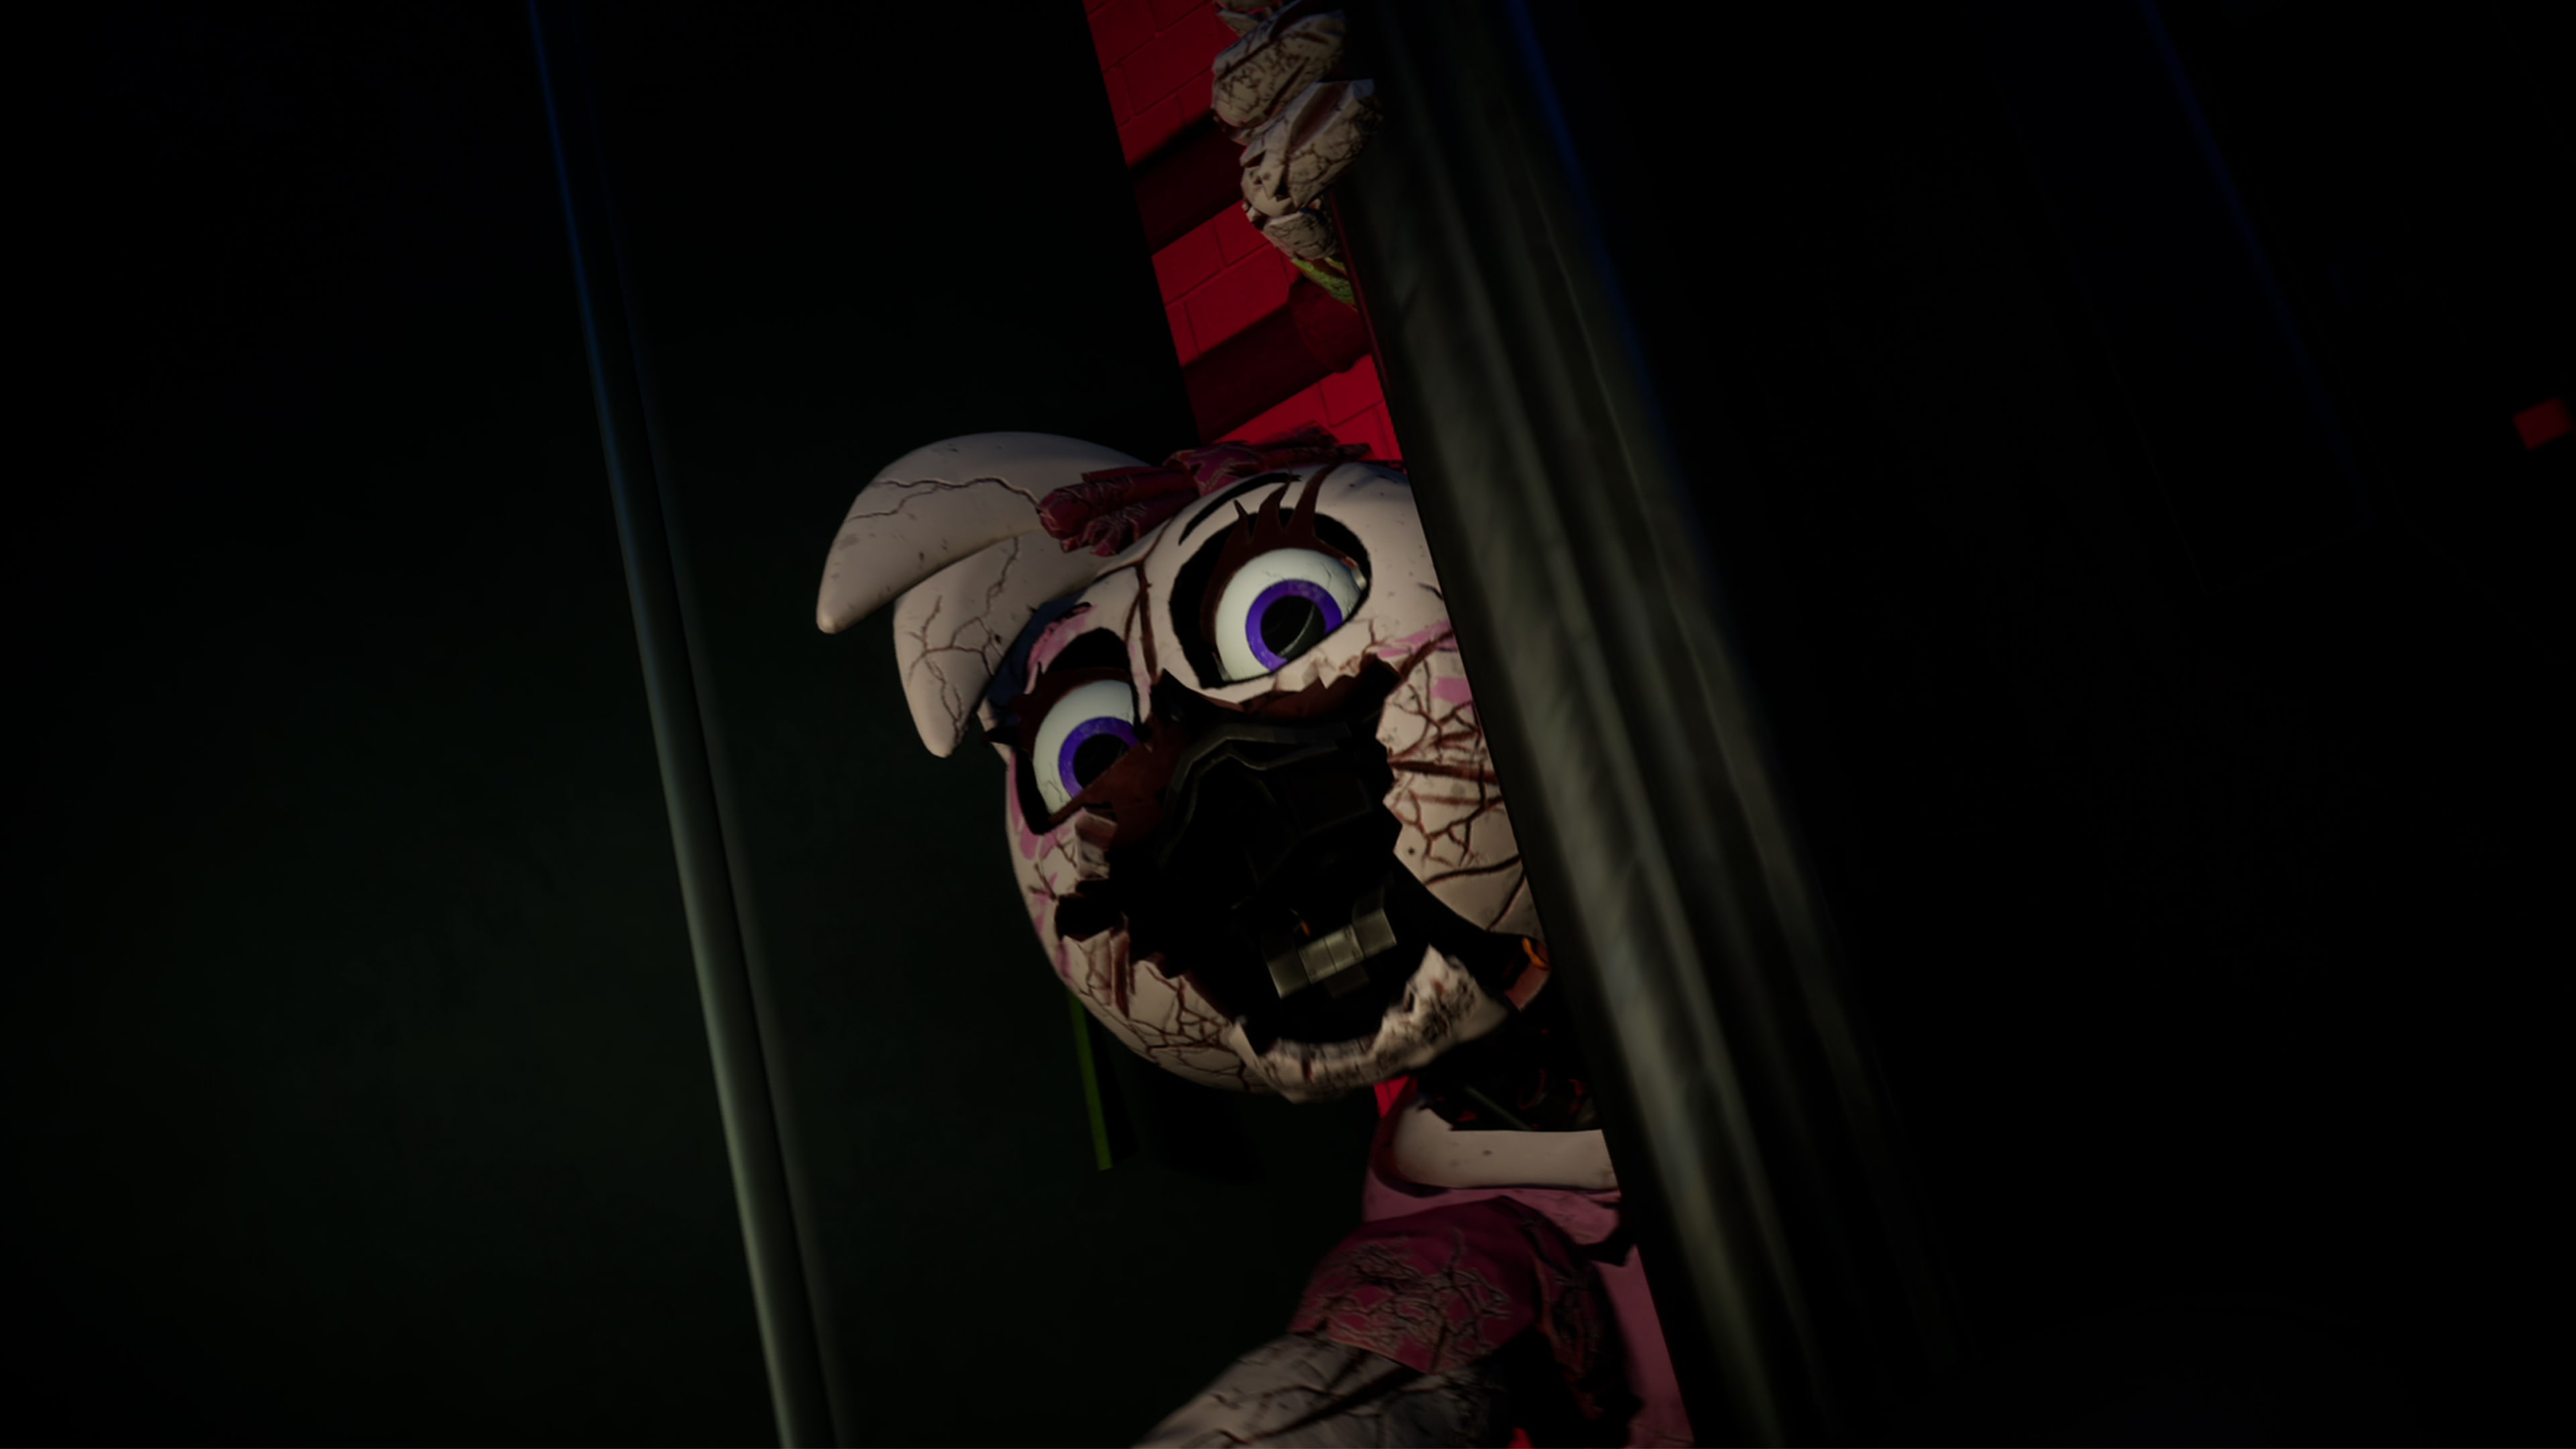 Five Nights at Freddy's: Security Breach Joins the PlayStation 5 Lineup